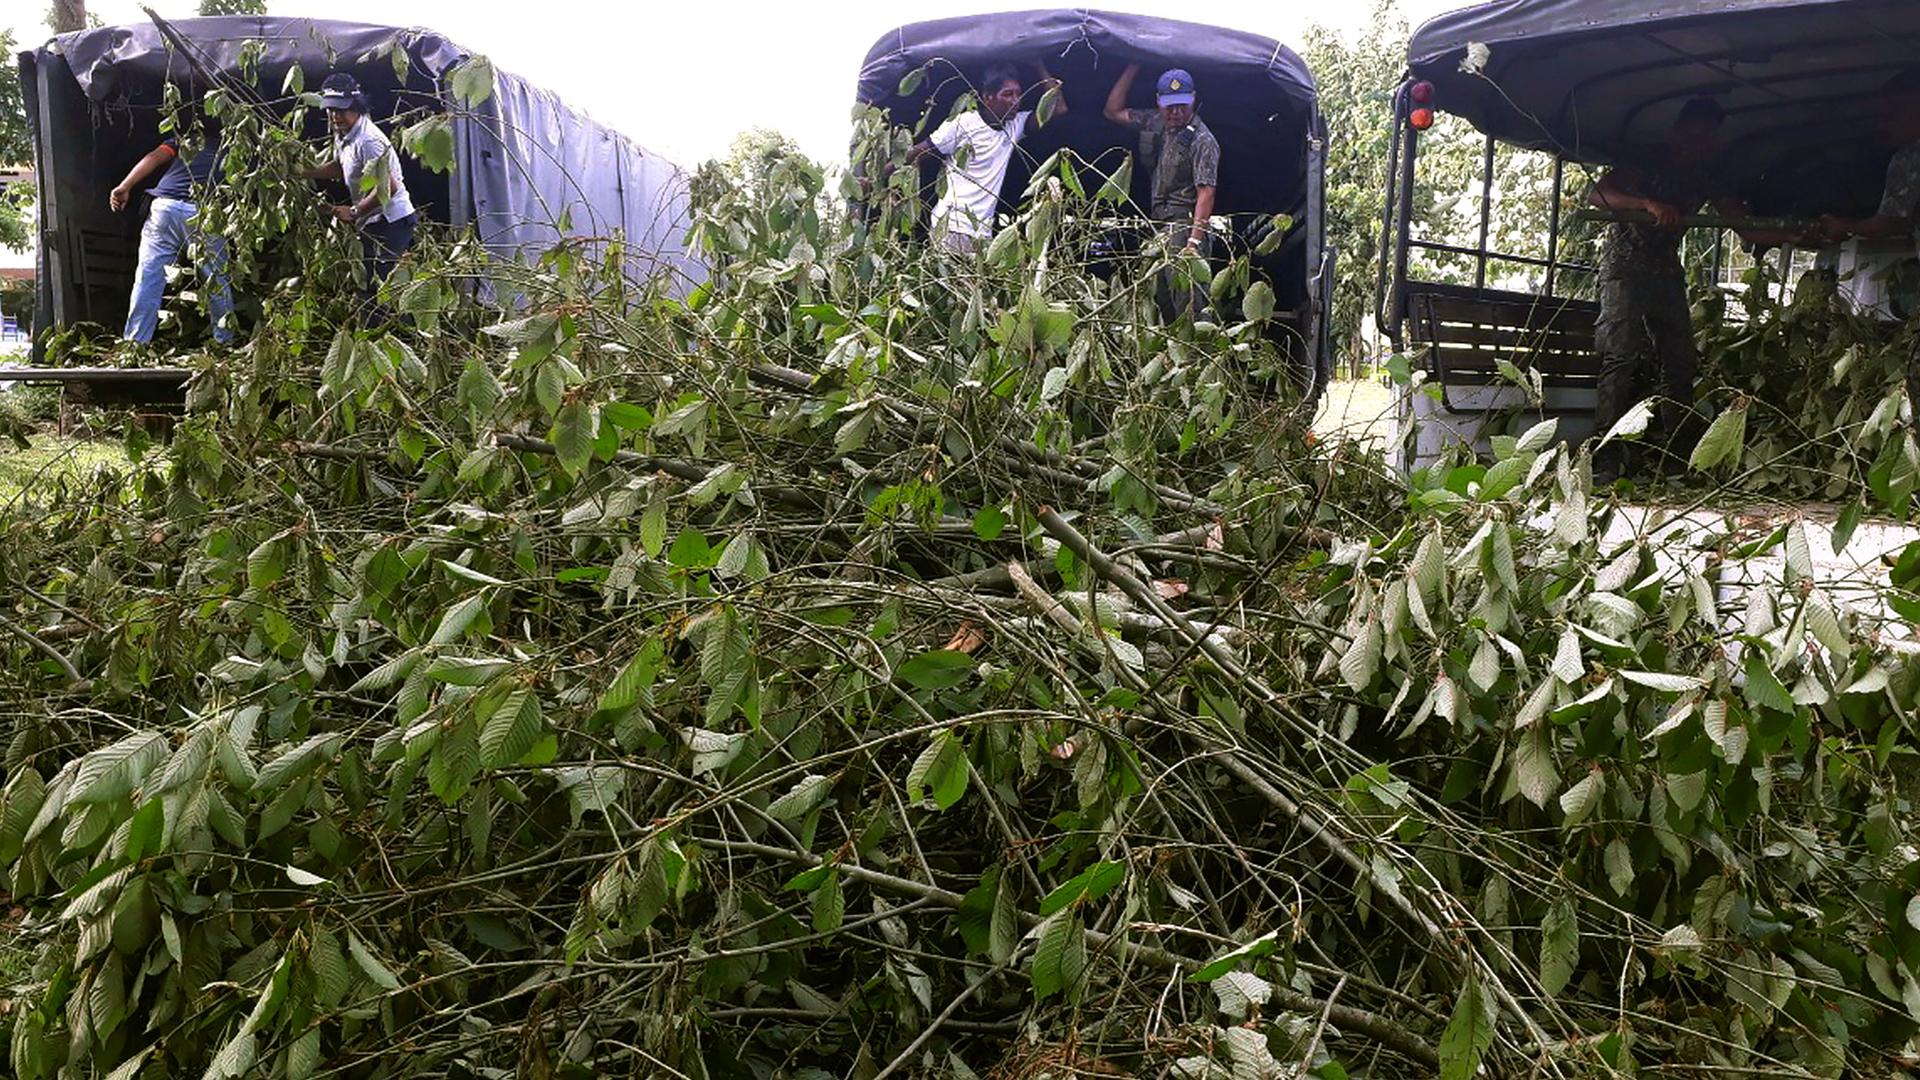 Officers gather kratom plants in Phang Nha province, Thailand. Thailand on Tuesday, Aug. 24, 2021, decriminalized the possession and sale of kratom, a plant native to Southeast Asia. 